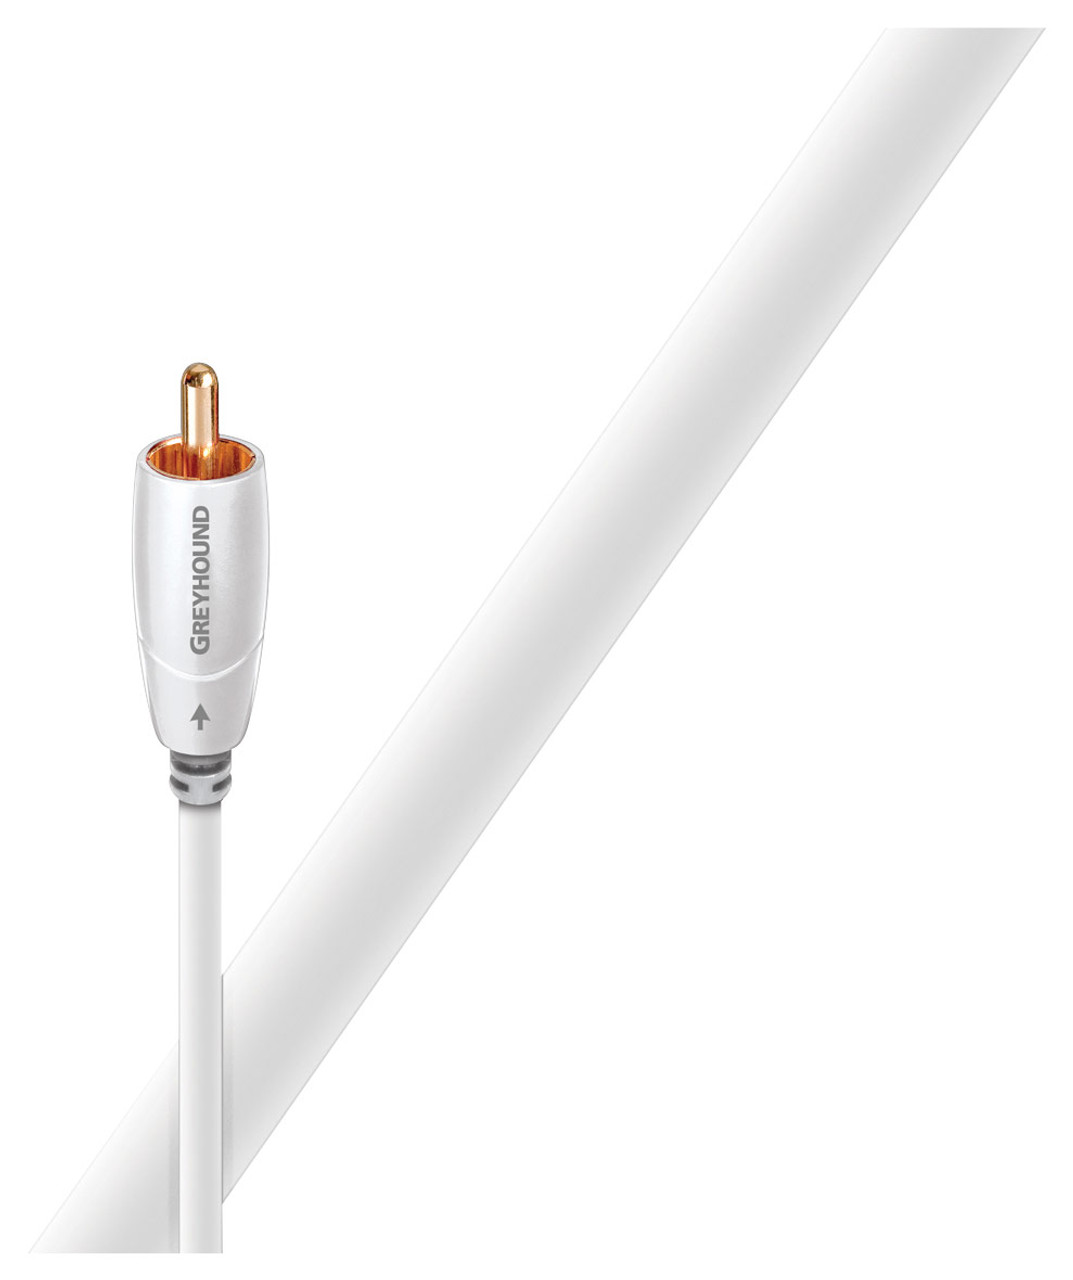 AudioQuest - 9.8' Subwoofer Cable - White/Light Gray